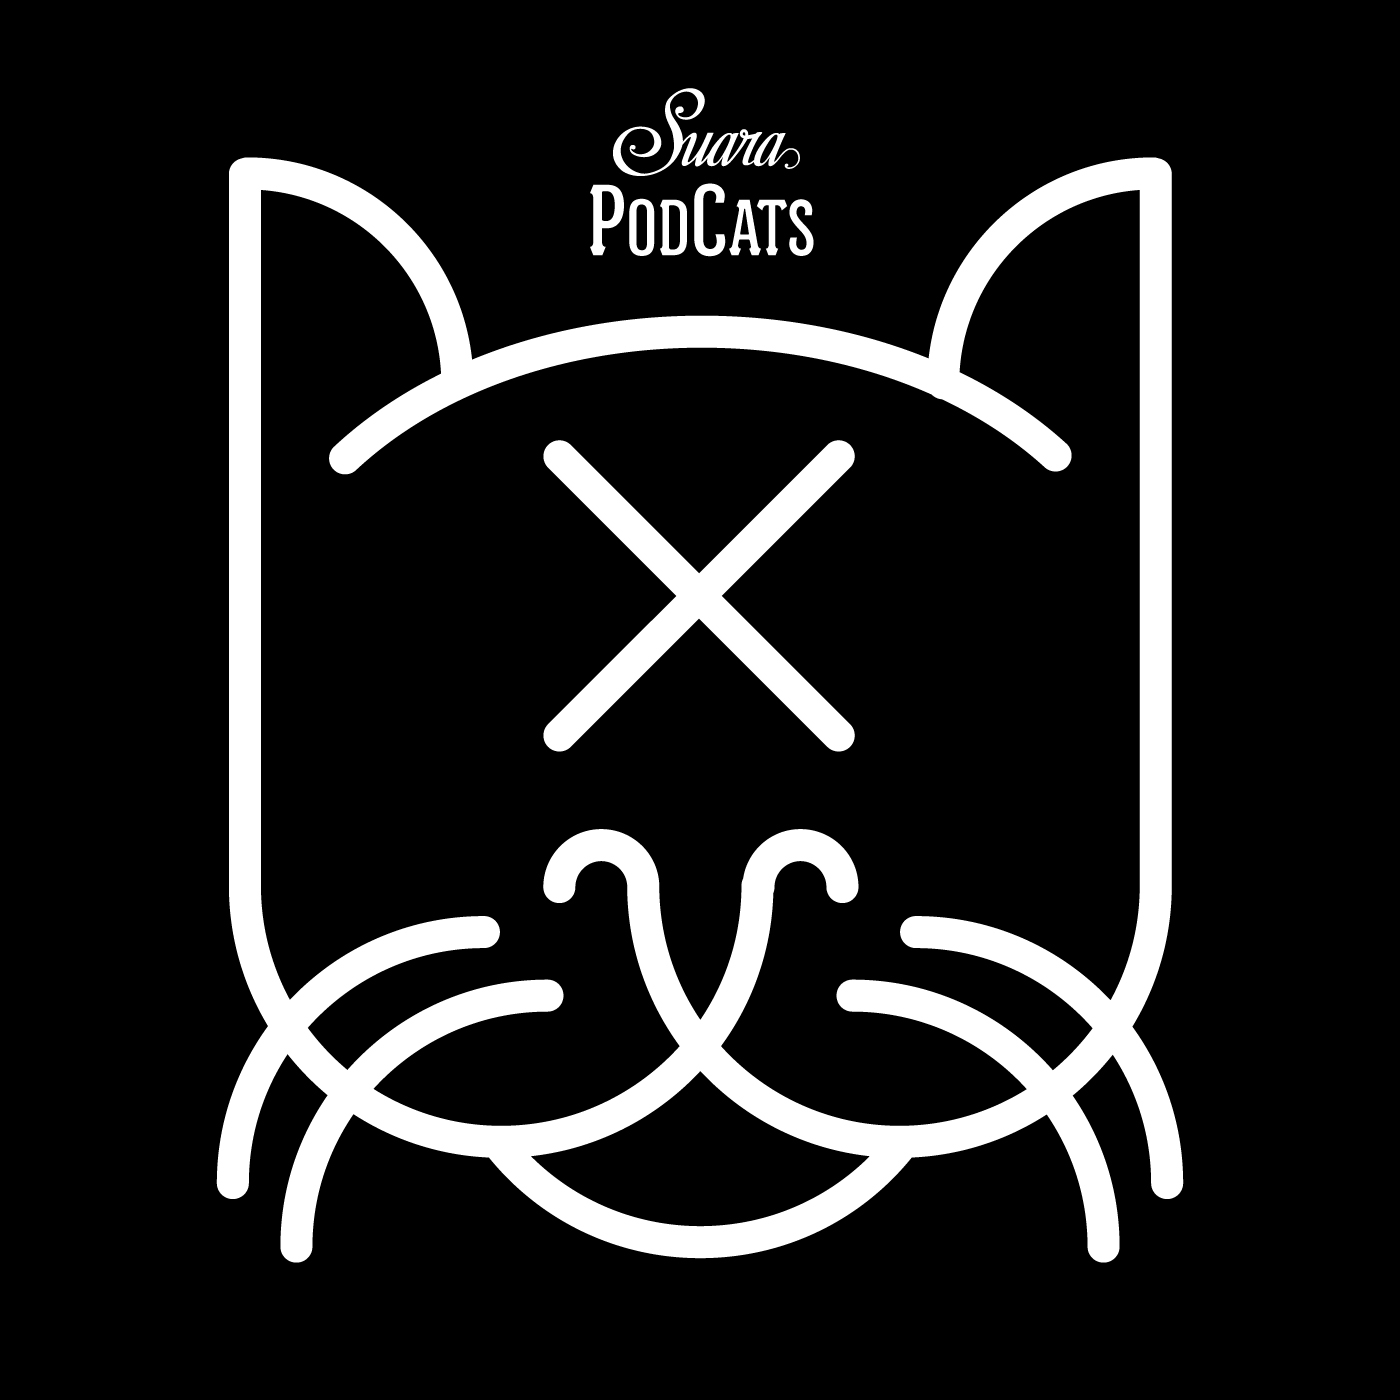 Delta Podcasts - Suara PodCats by Coyu (26.03.2018)